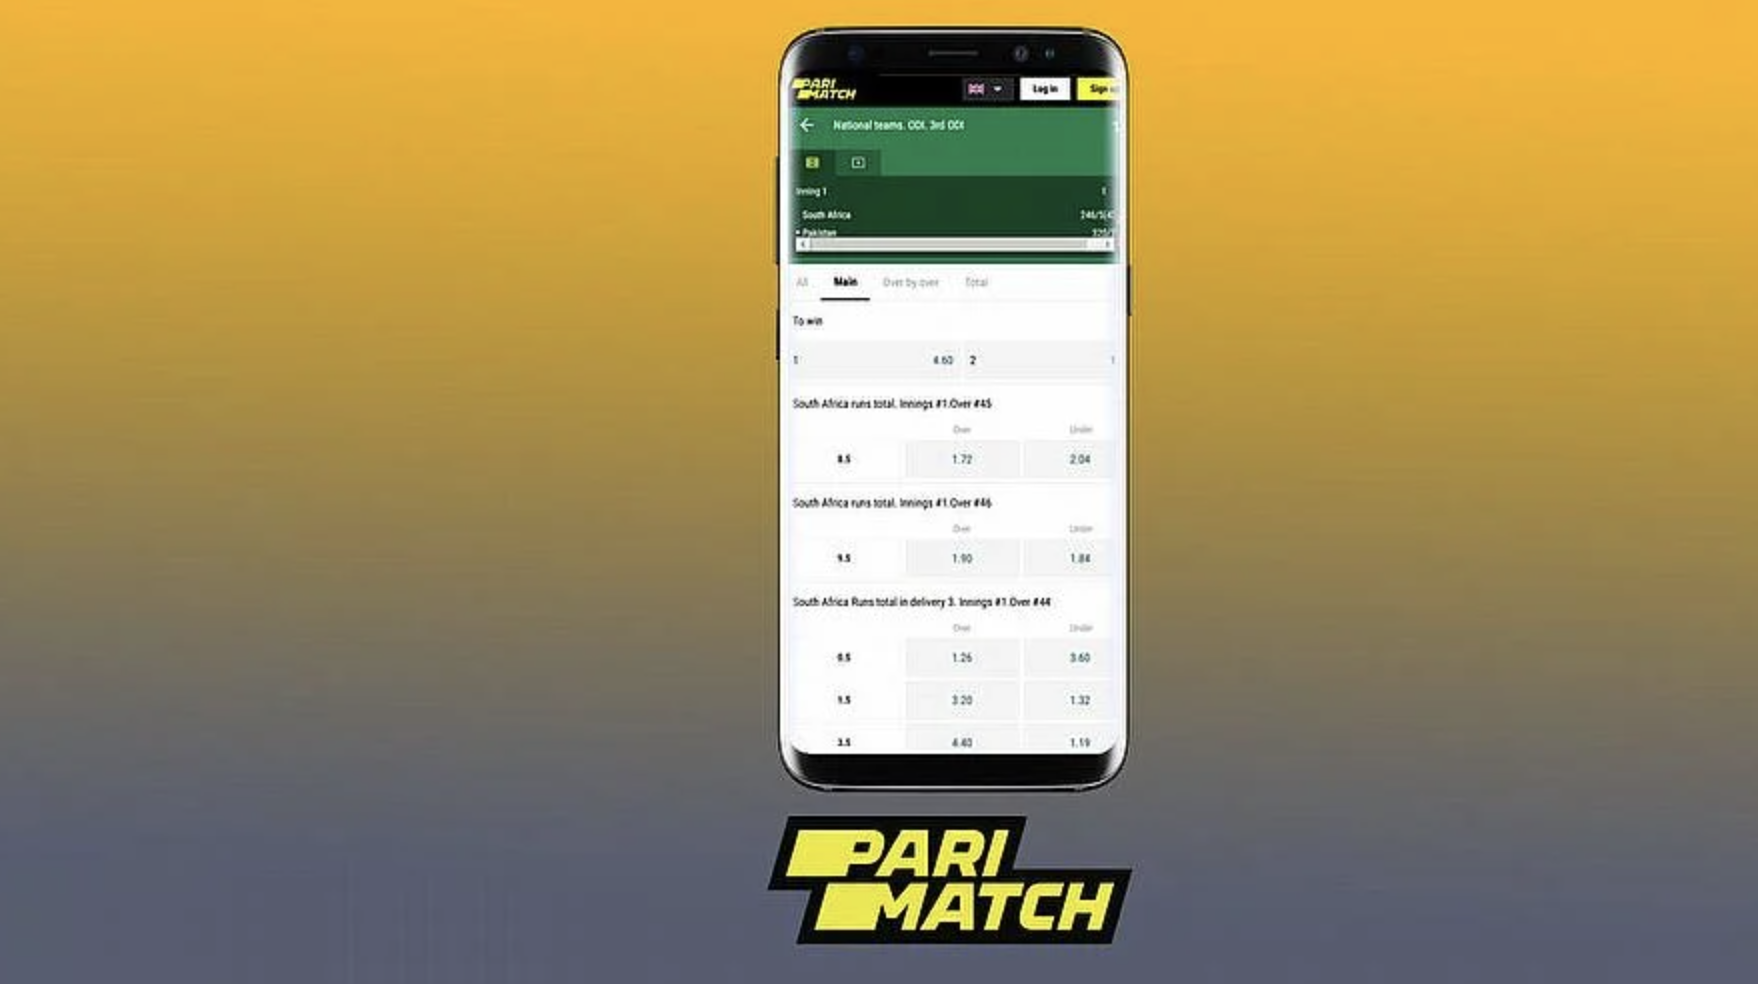 Parimatch bookmaker is one of the first operators to introduce betting and casino games